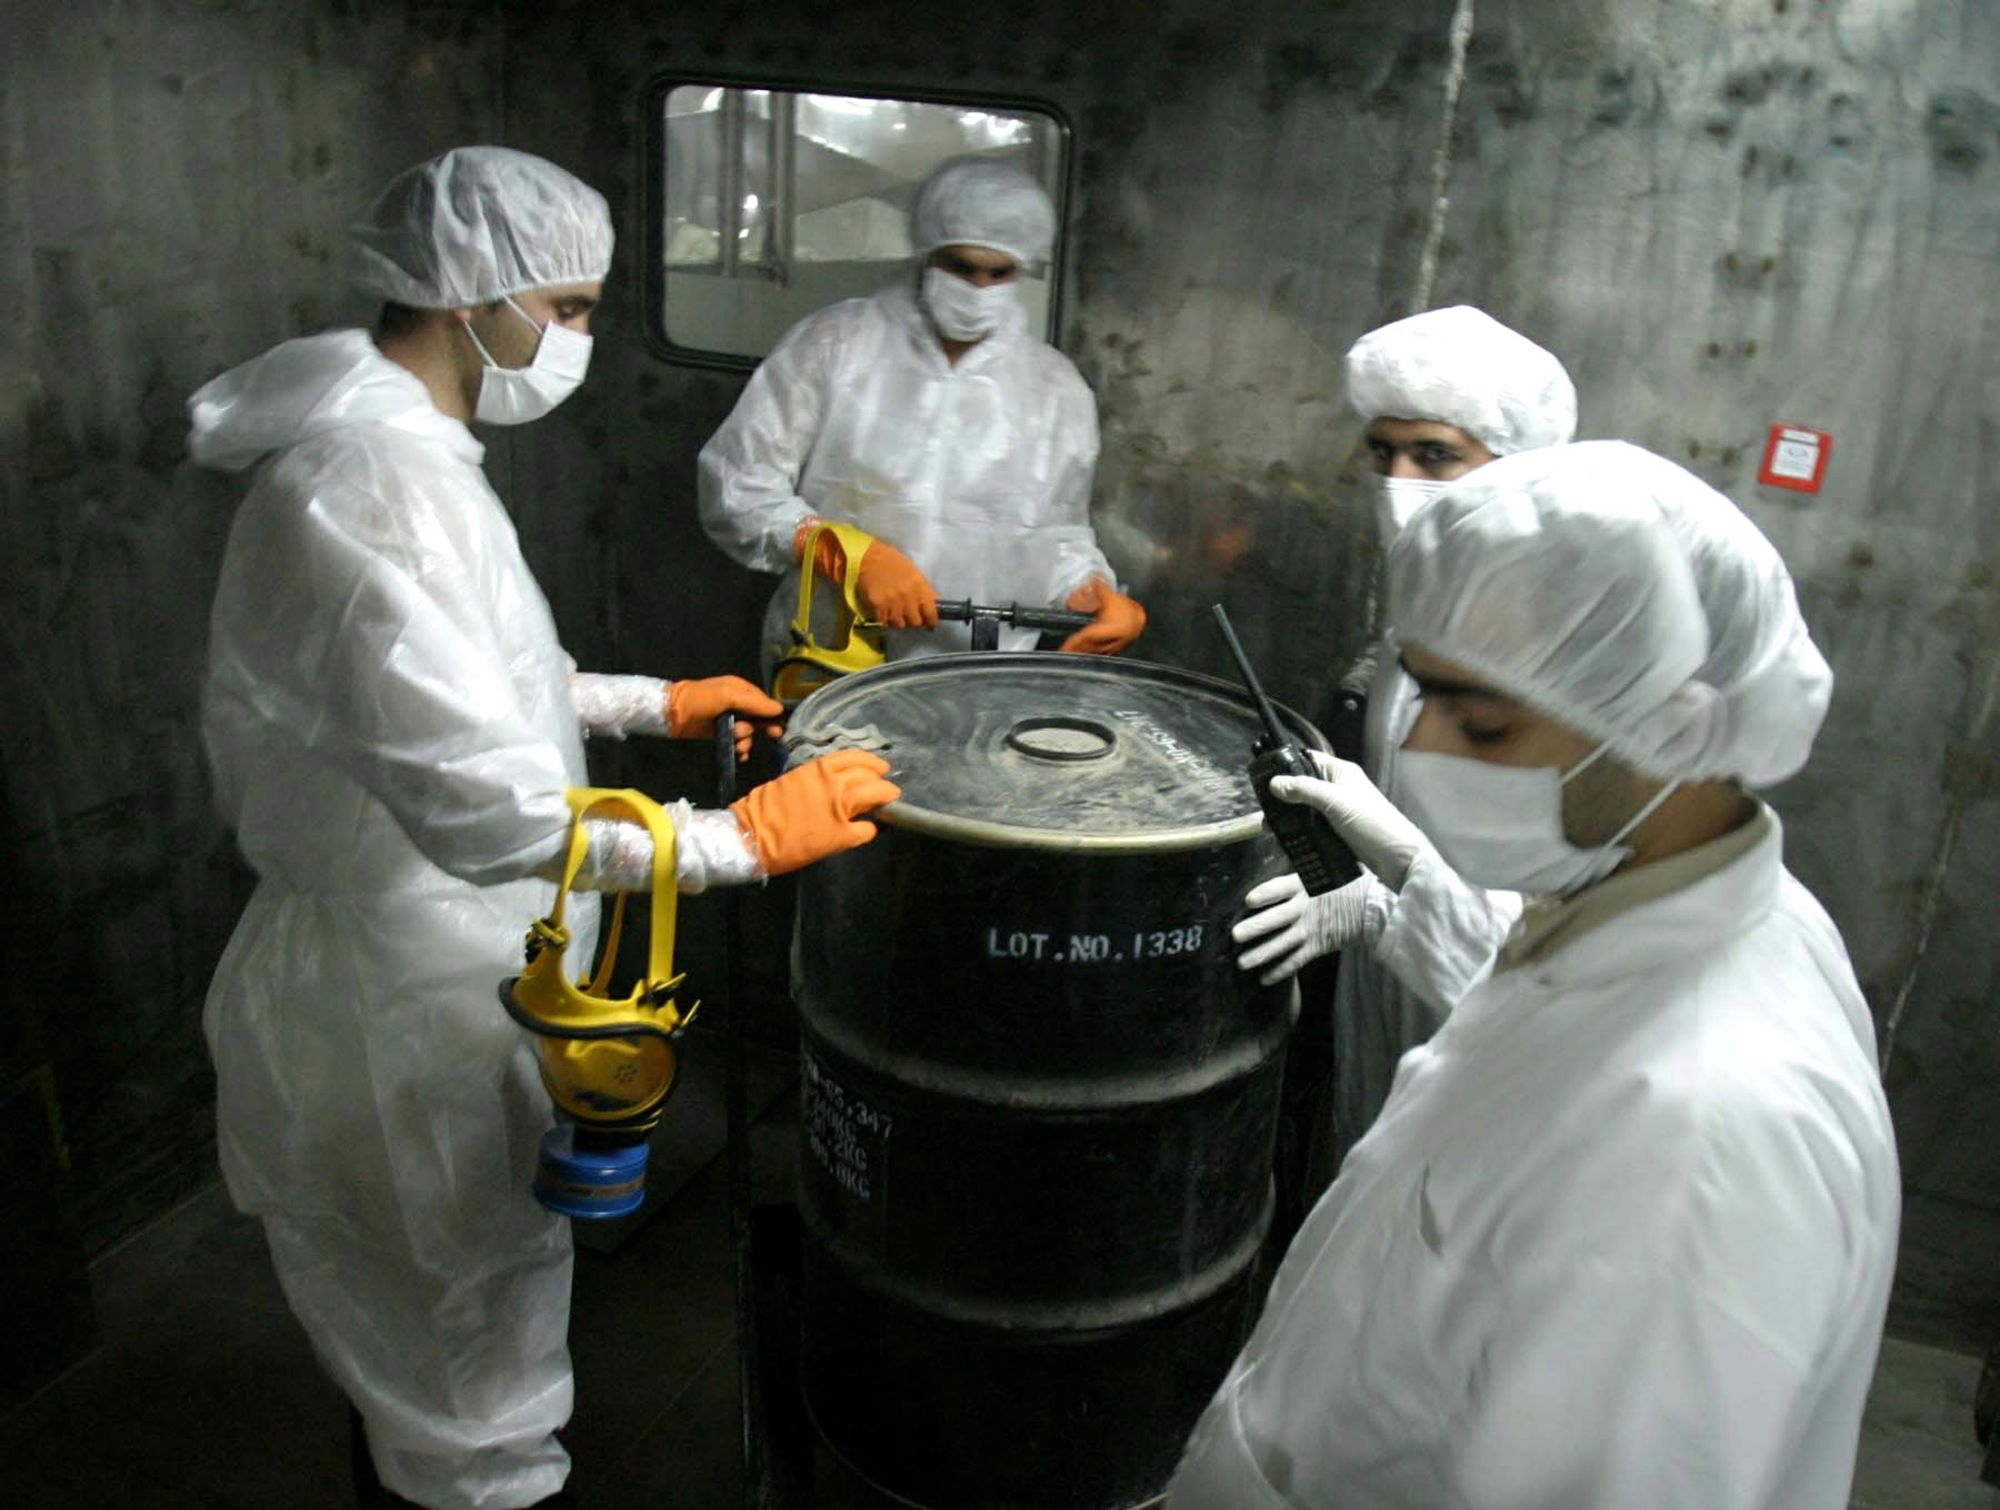 Iranian technicians lift a barrel of "yellow cake" to feed it into the processing line of Uranium Conversion Facility (UCF) in Isfahan, Iran in an August 8, 2005 file photo.